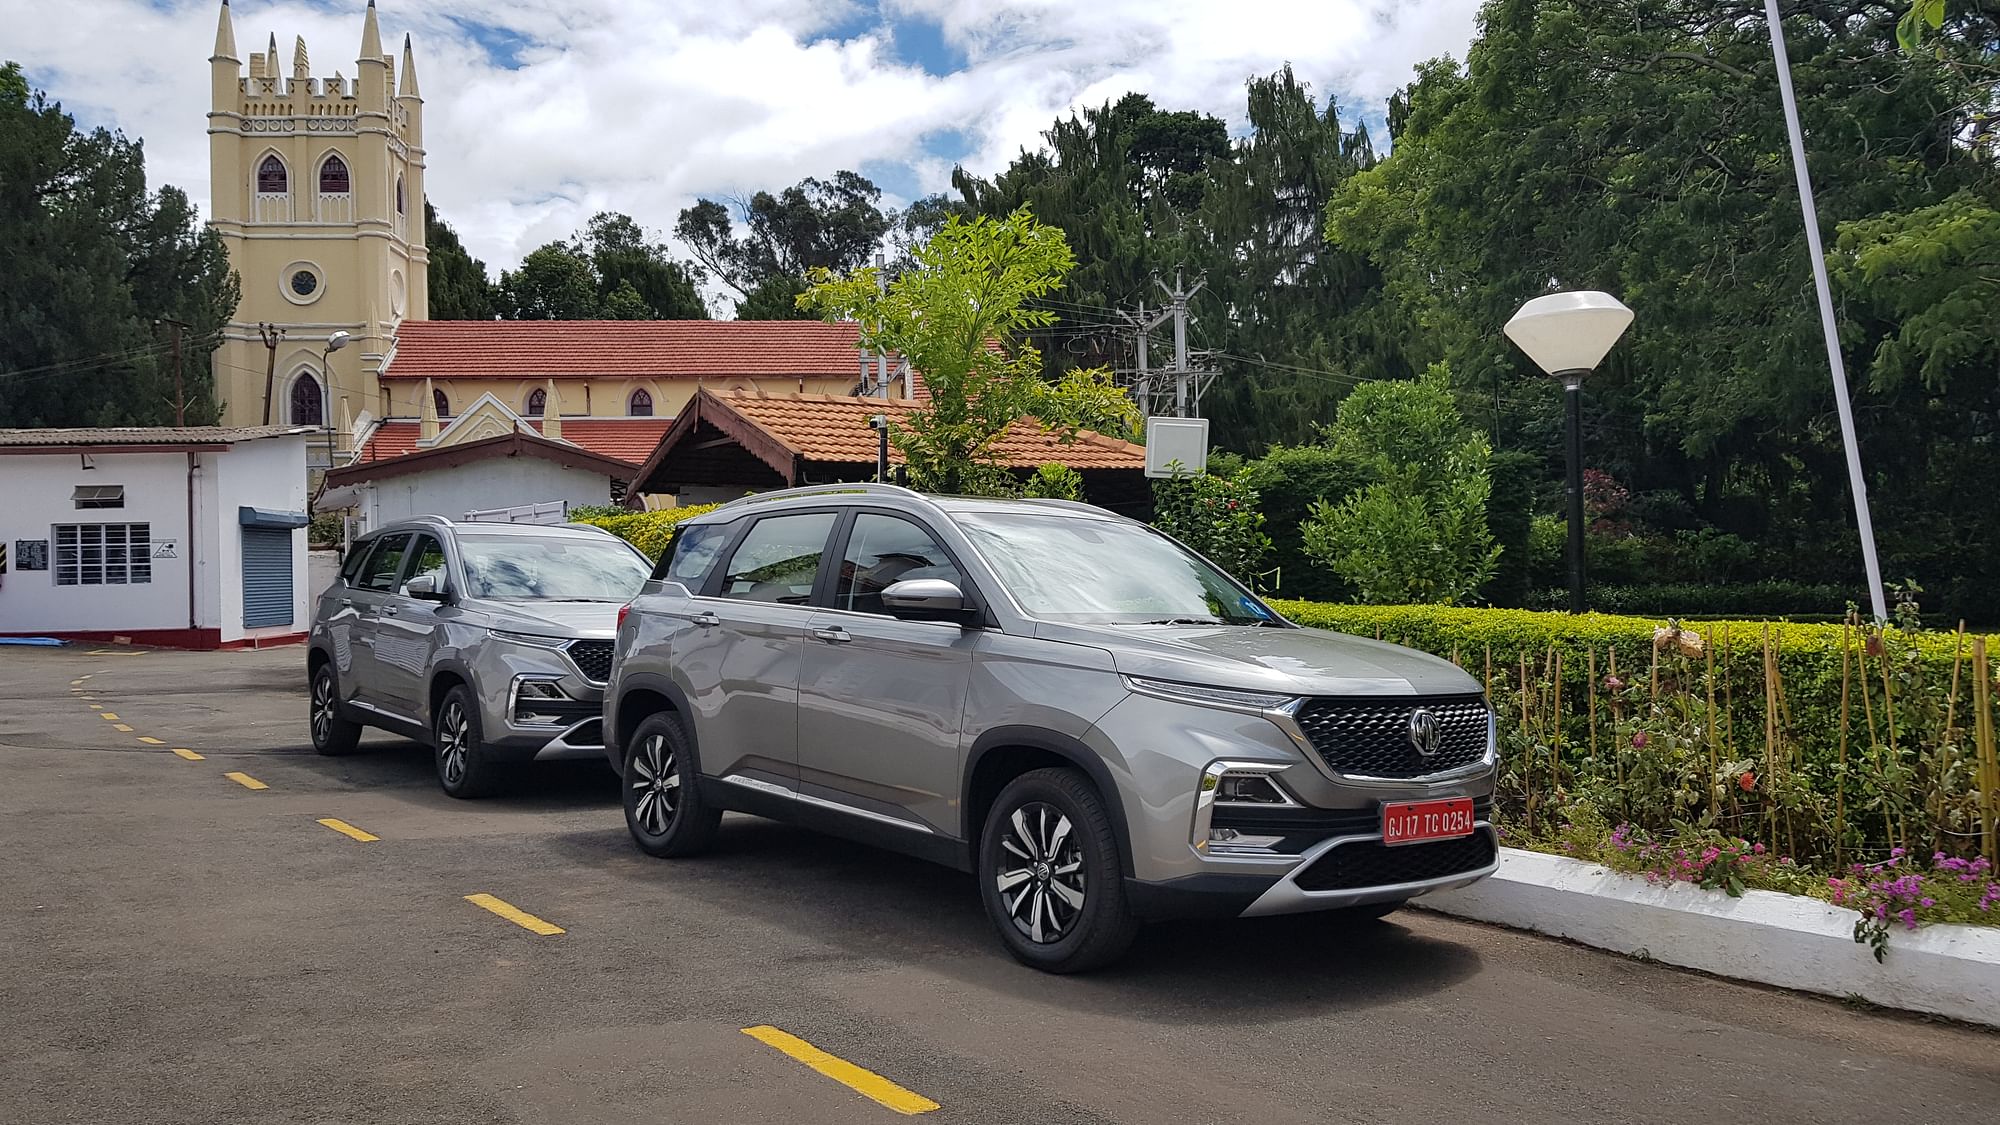 The MG Hector could be the cat among the pigeons in the five-seater SUV segment.